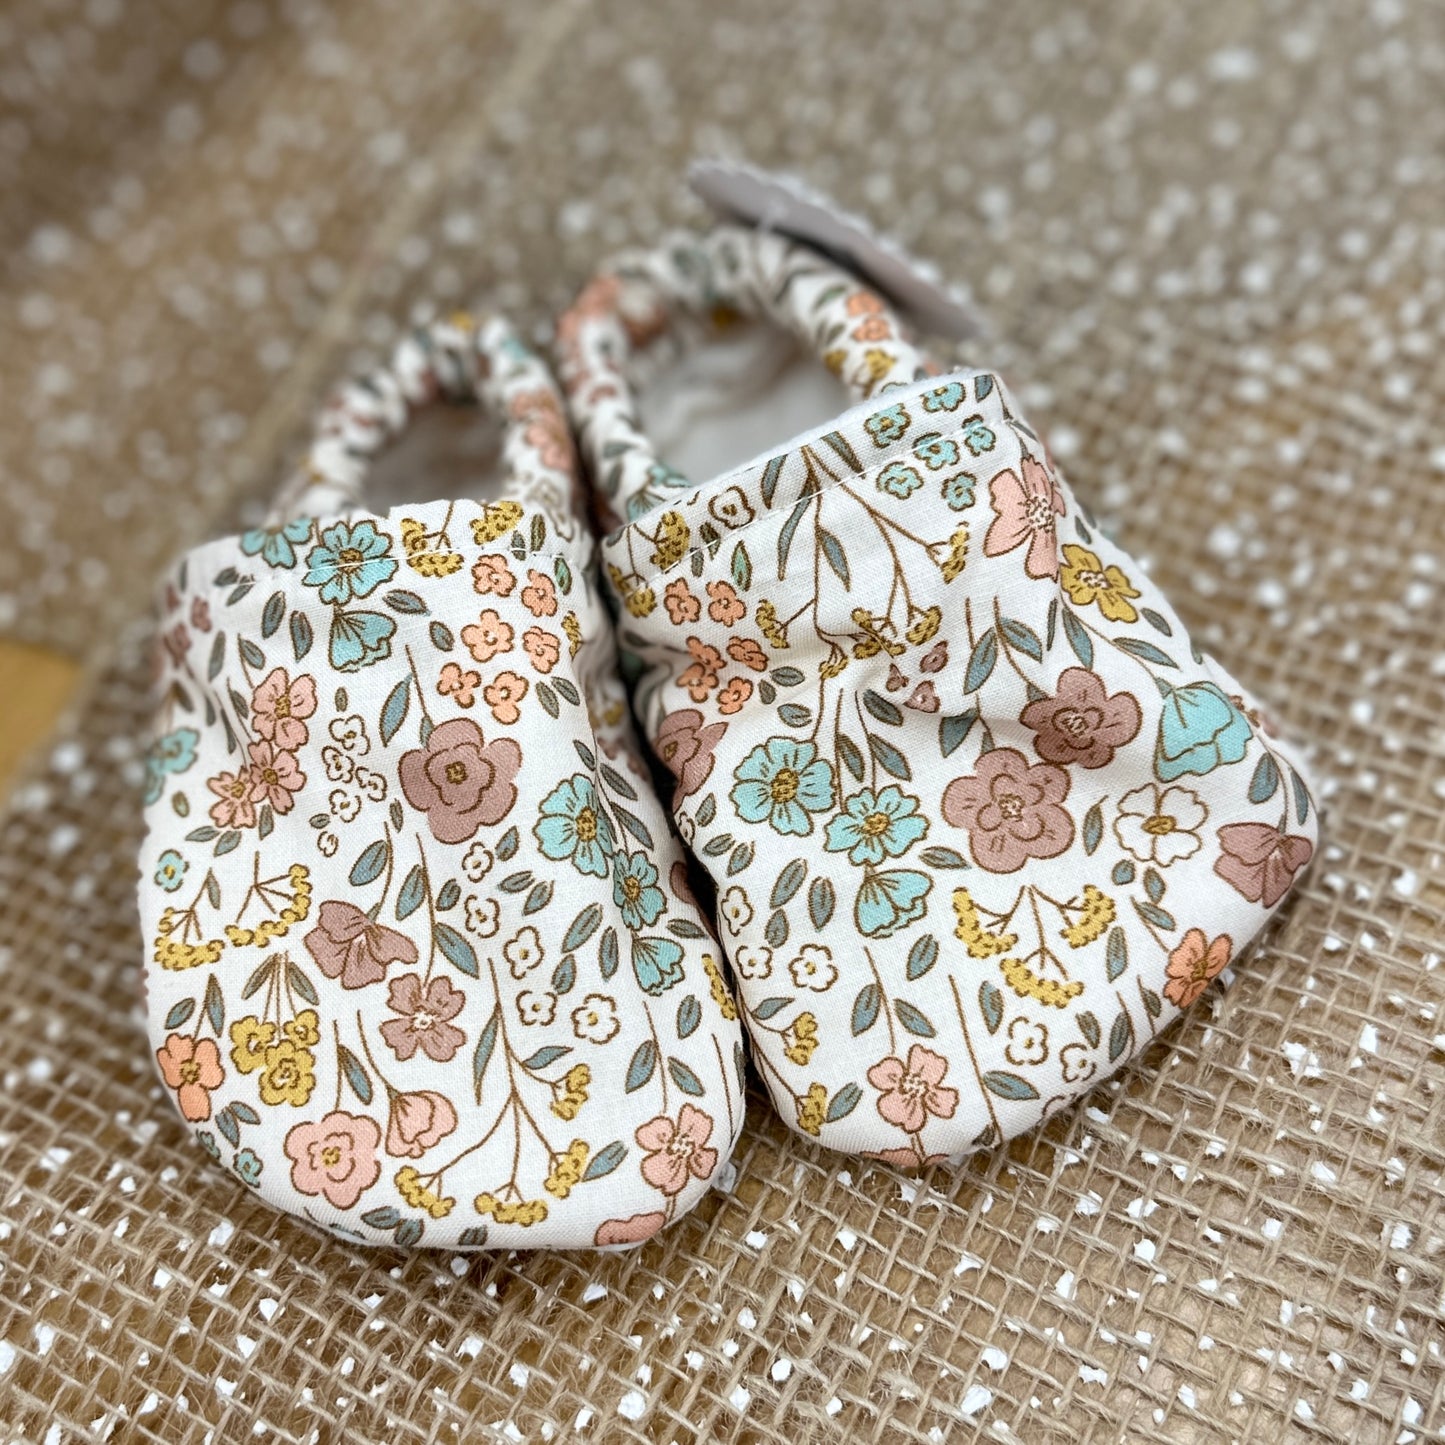 FABRIC BABY SHOES